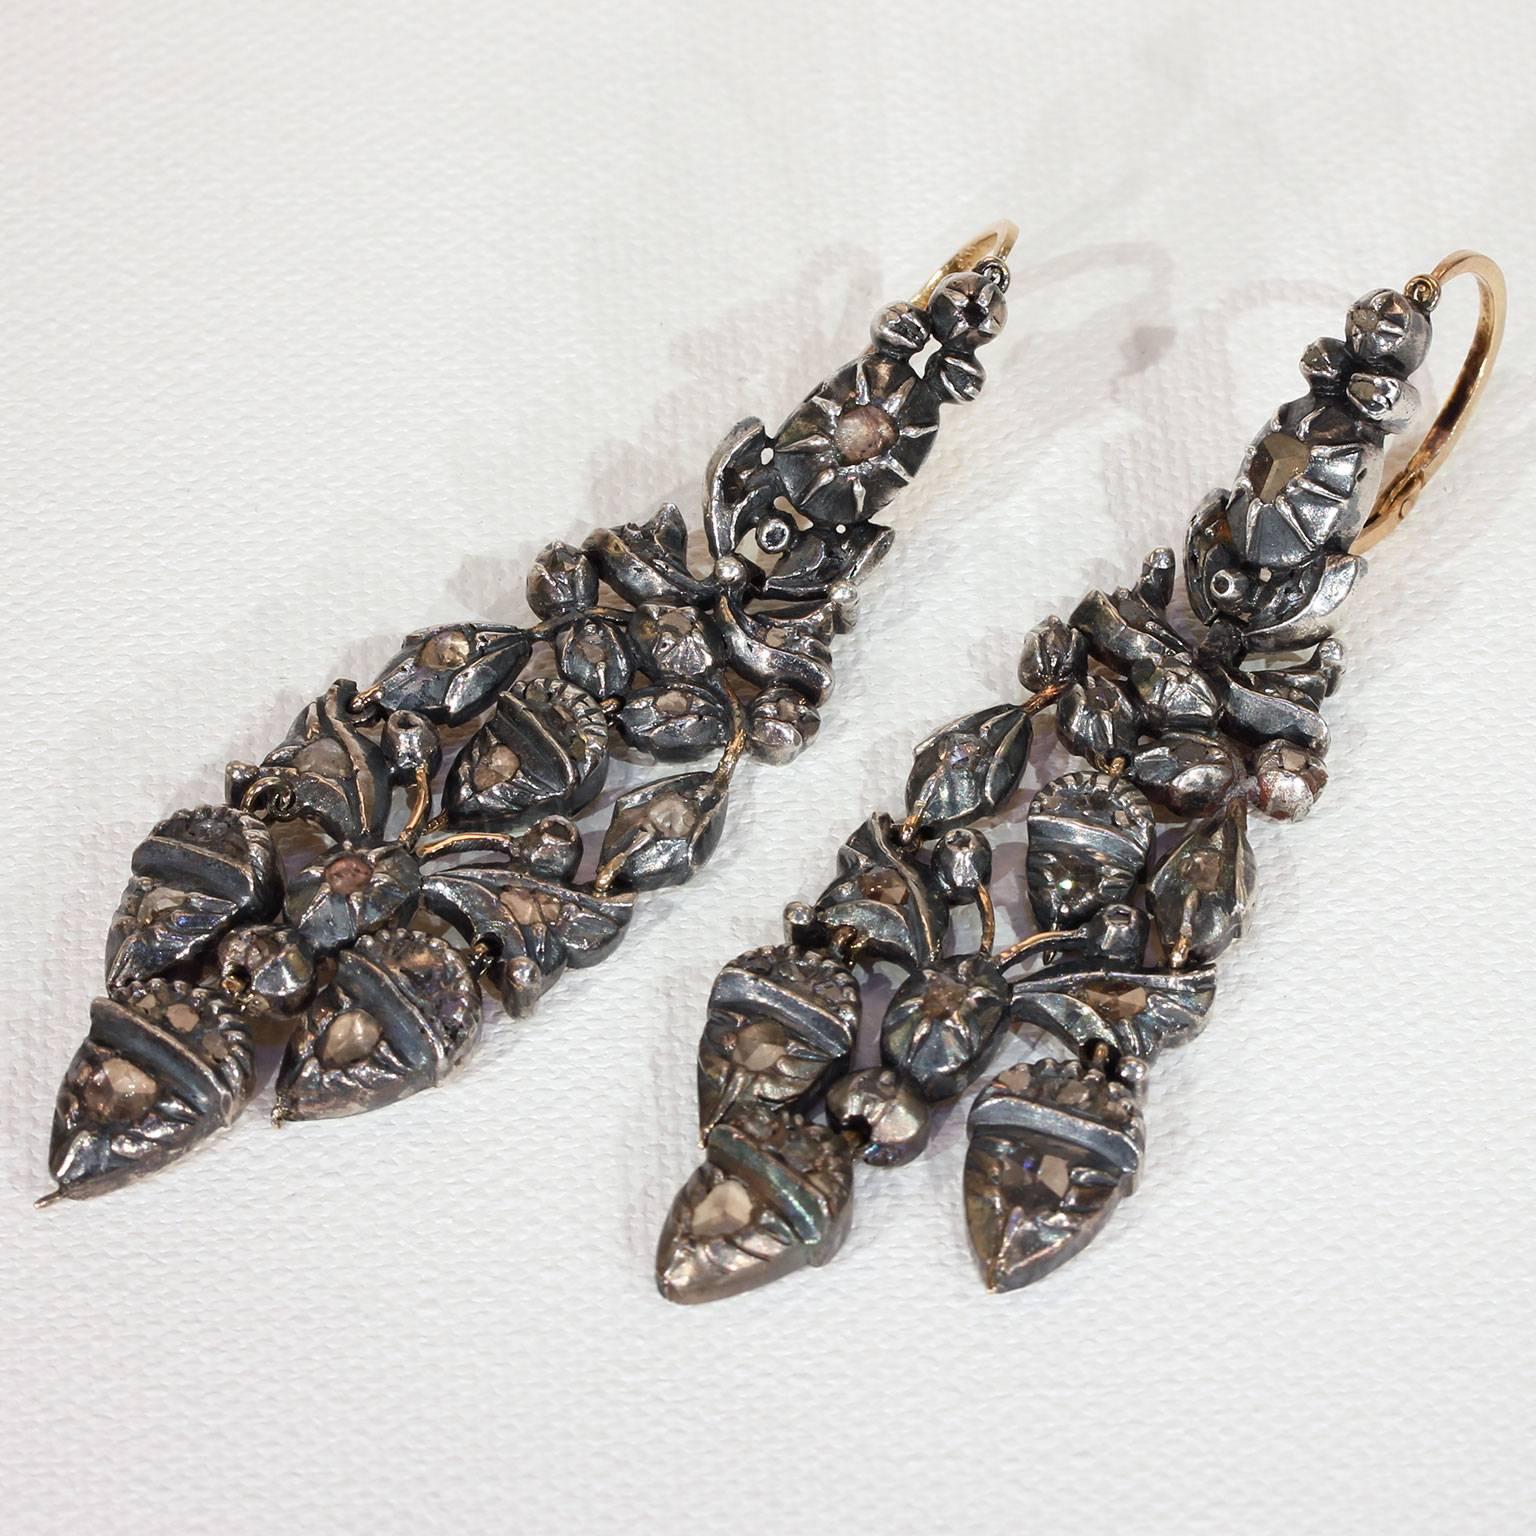 These fabulous, long statement earrings were hand crafted in the Georgian era, around 1780. They feature an acorn and oak leaf motif and are set with table cut rose diamonds. These earrings are sterling silver over 14 karat gold and are probably